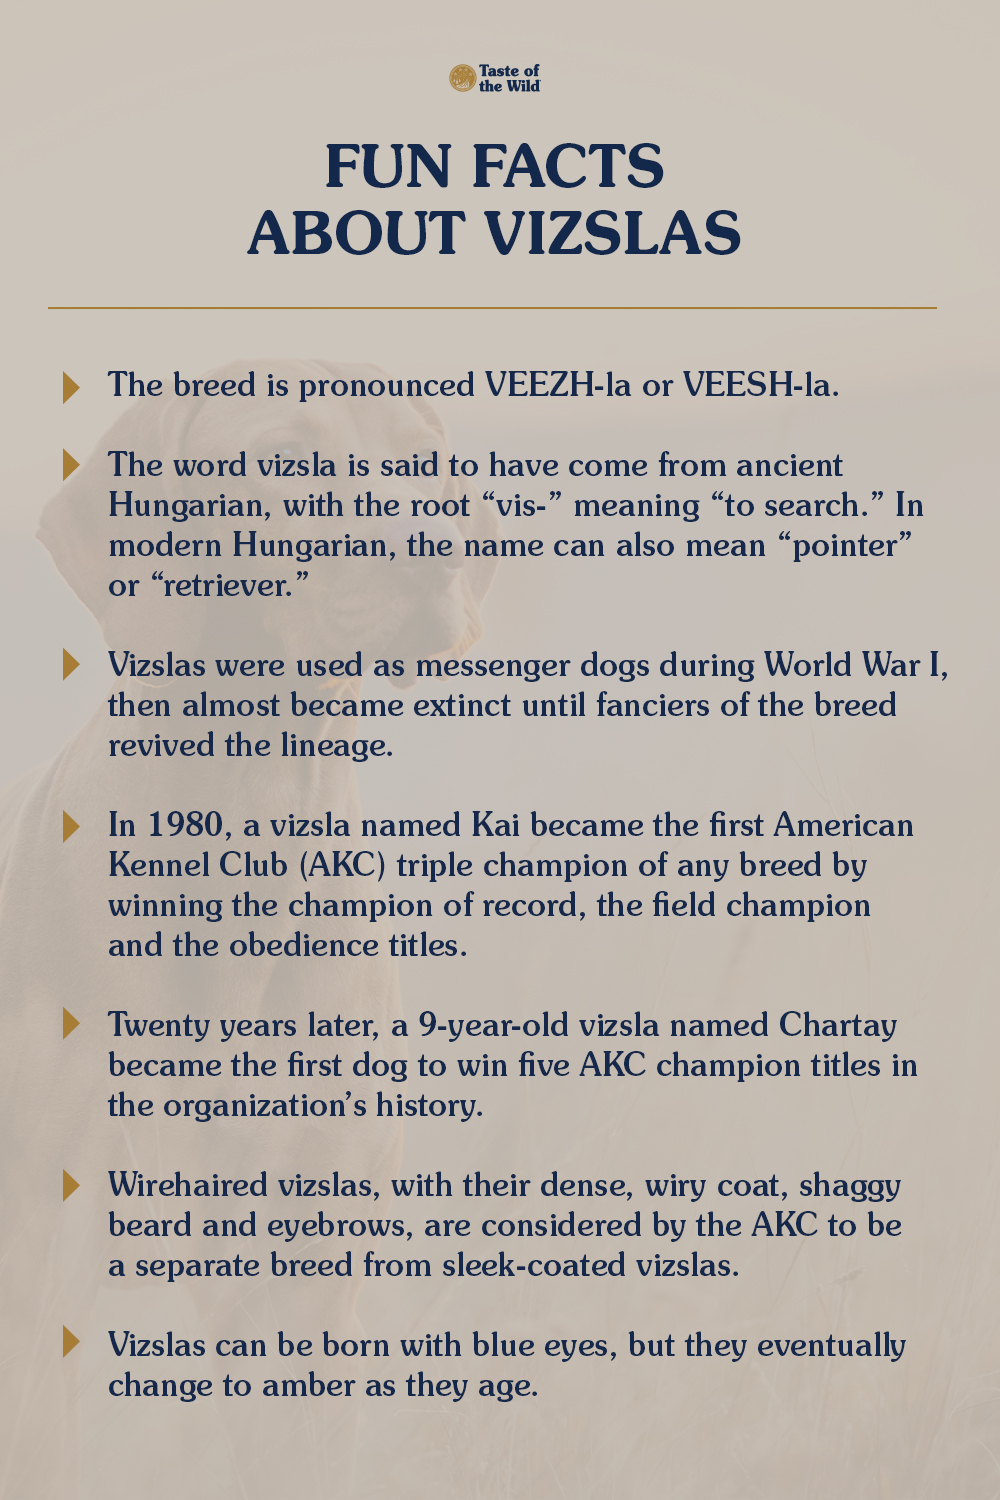 Fun Facts About Vizslas Infographic | Taste of the Wild